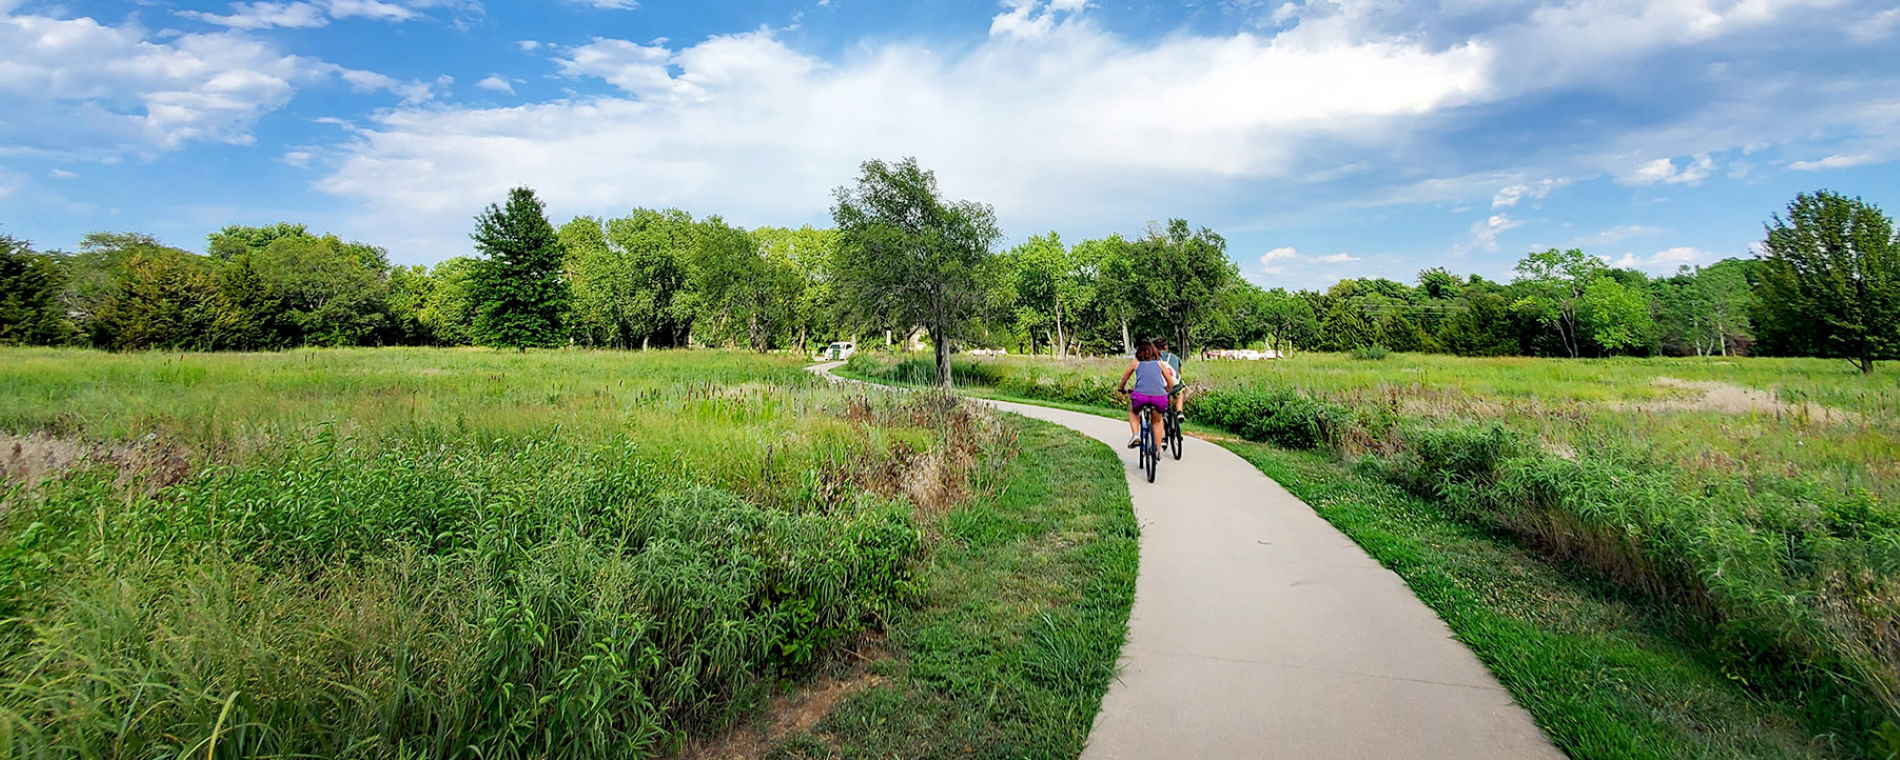 Cyclists on the Path at Swanson Park Wichita